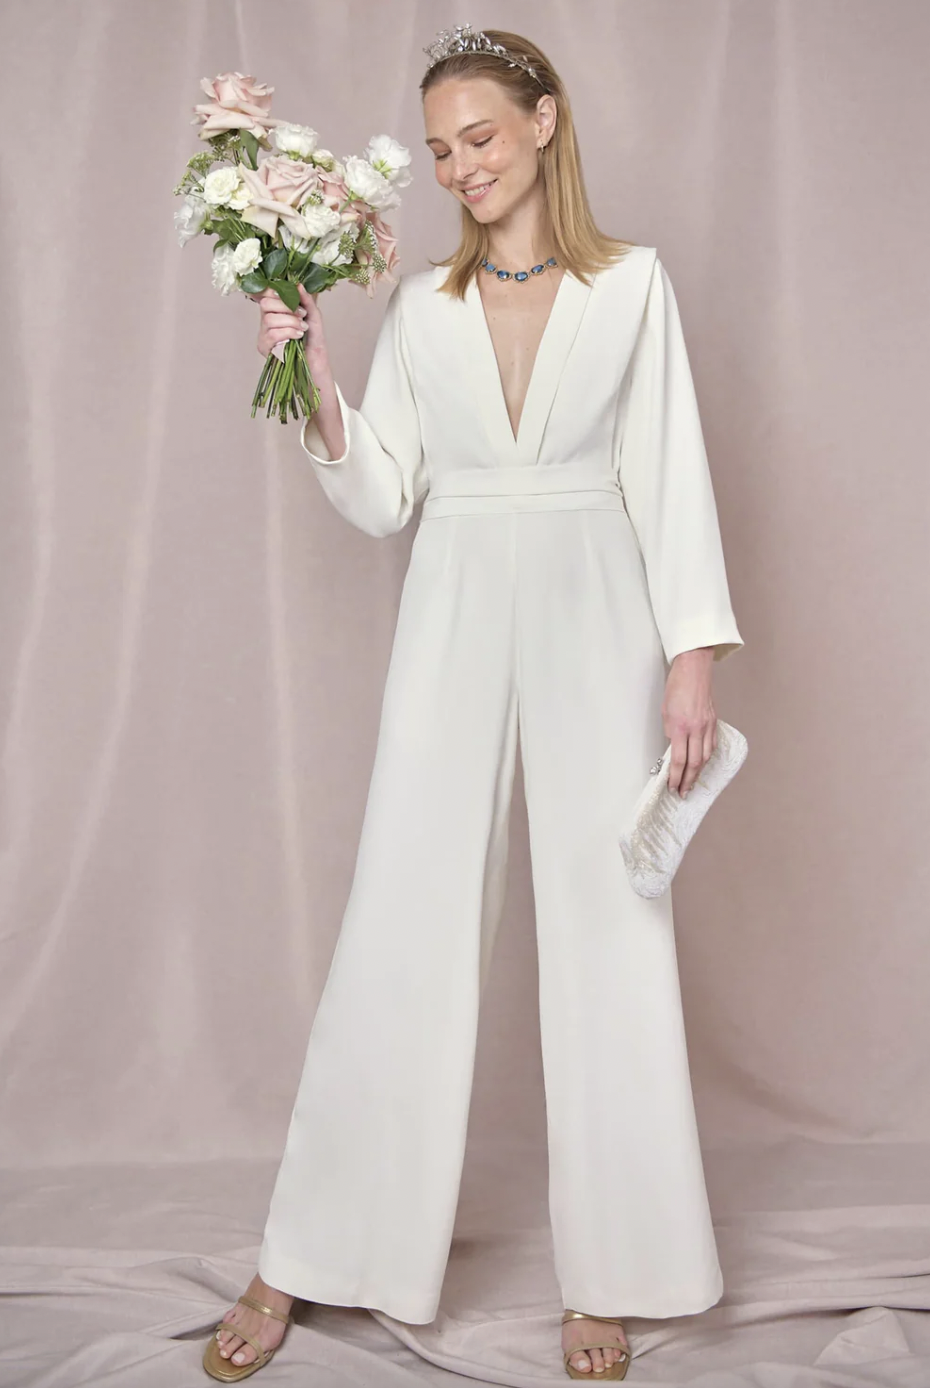 Jumpsuits for weddings: 35 best bridal and wedding jumpsuits